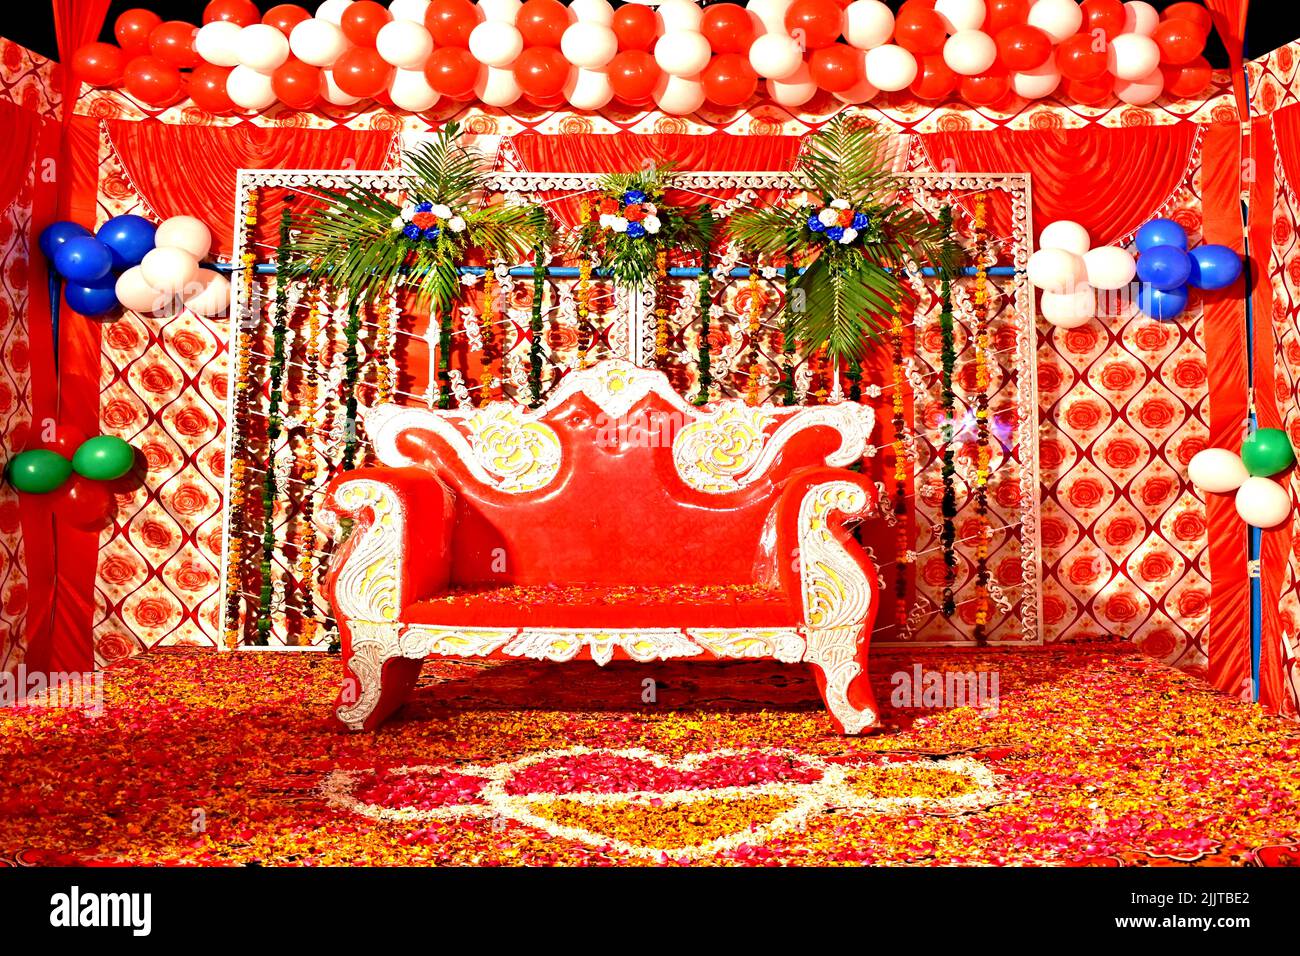 A red sofa in a decorated room in Indian-style Stock Photo